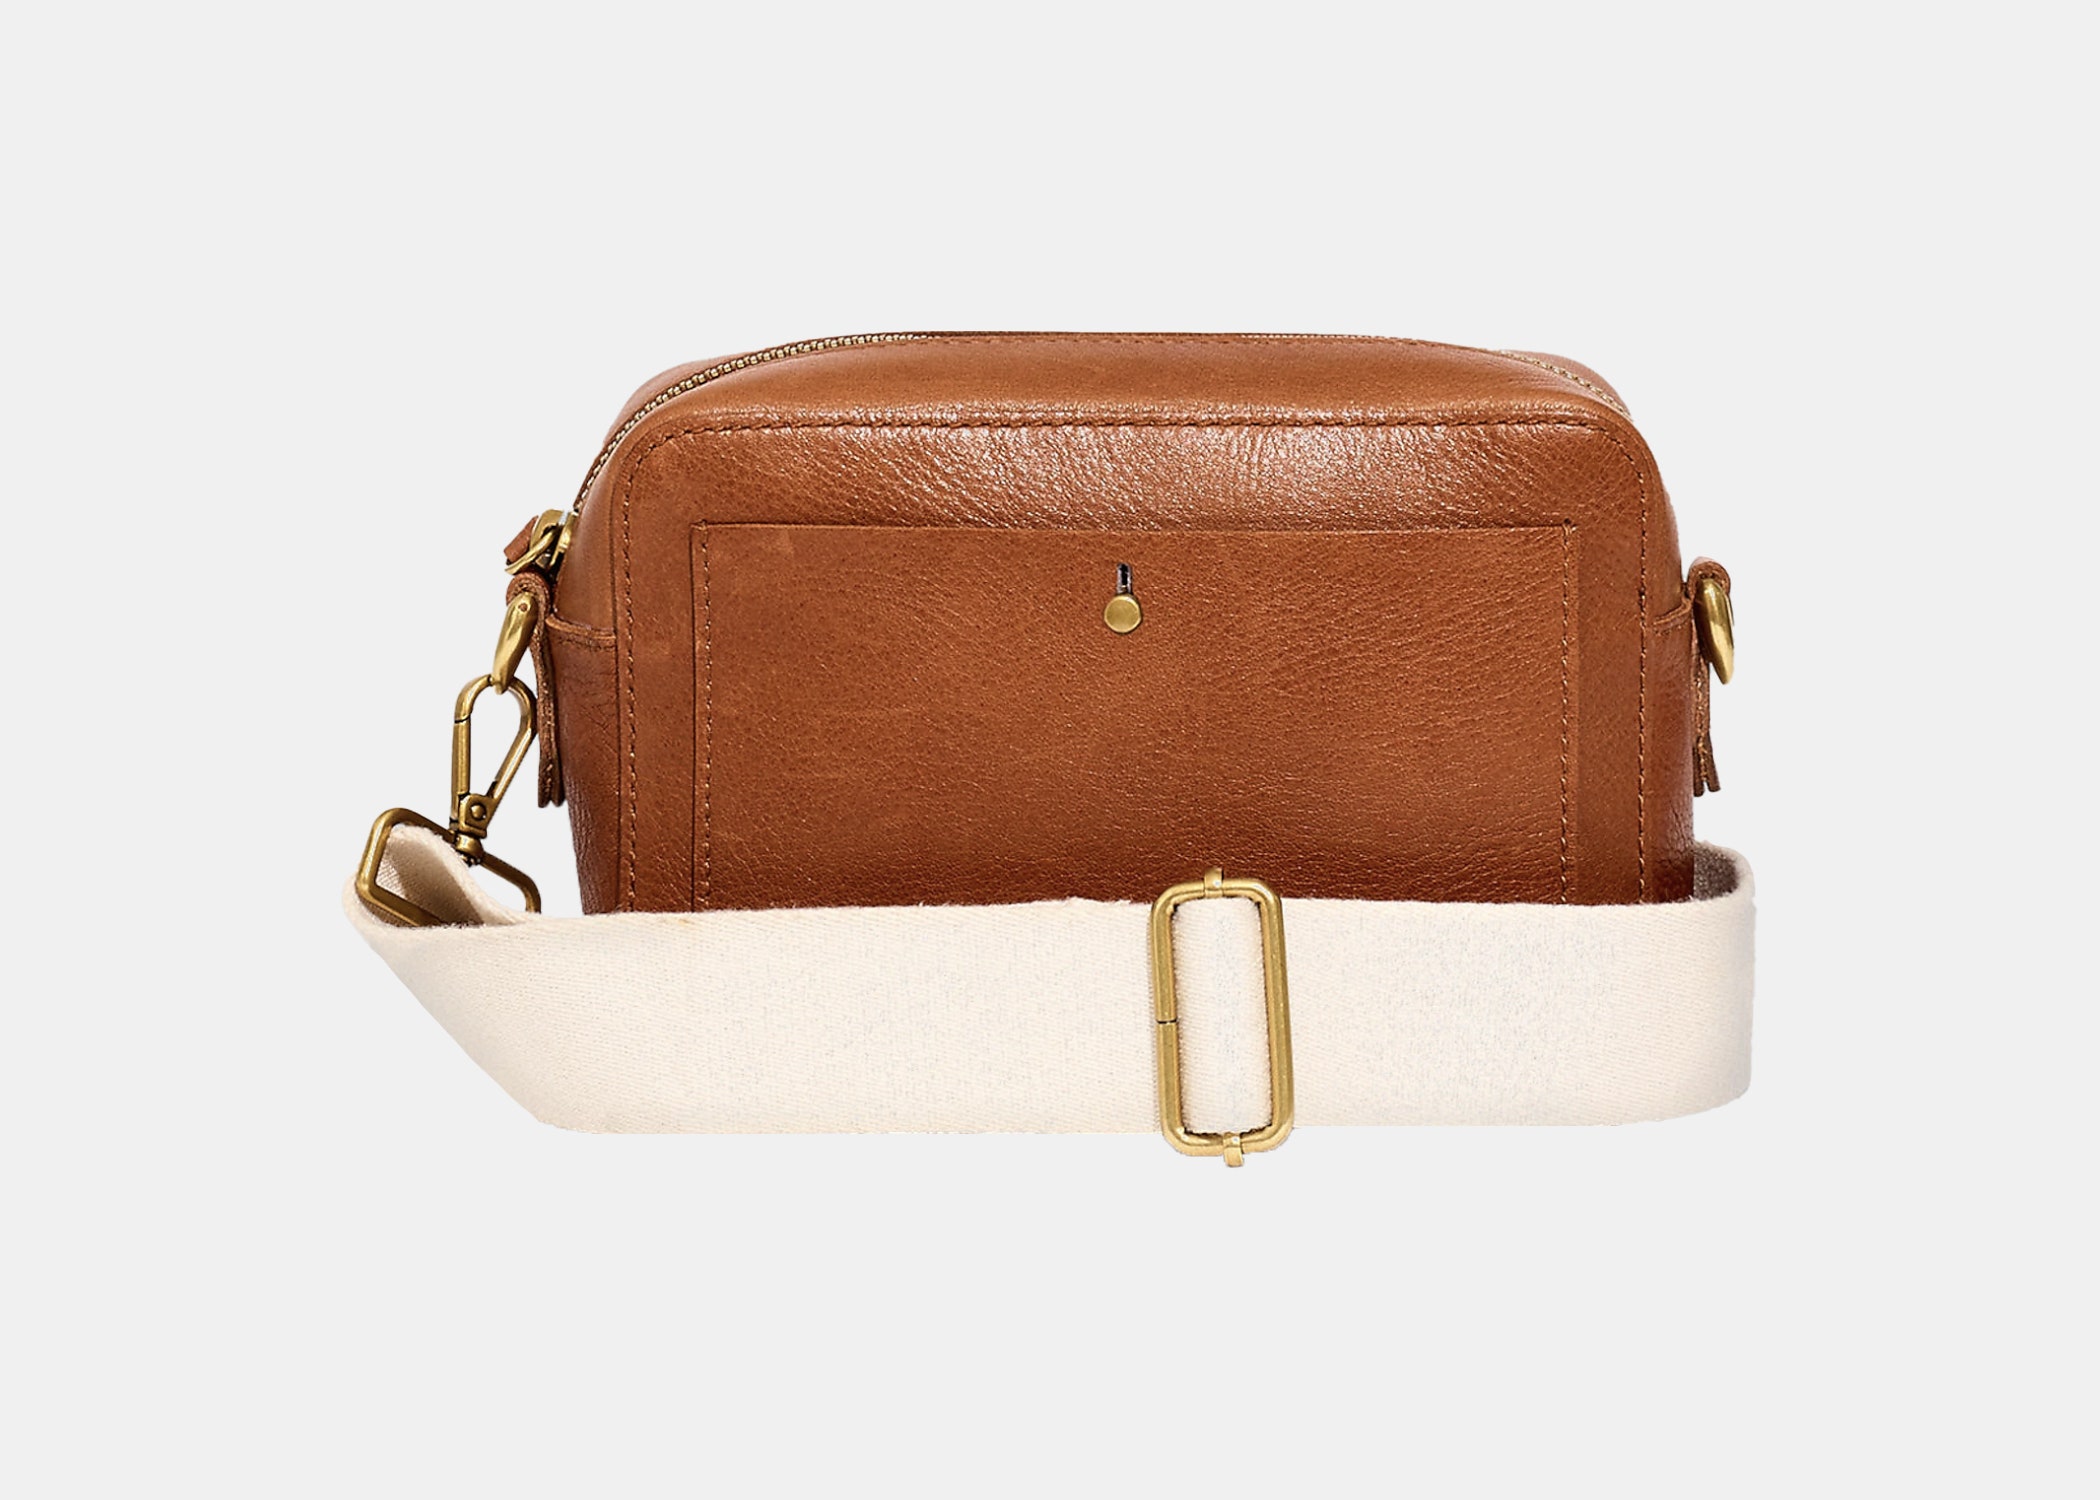 <p><strong>Best camera bag that doesn’t look like a camera bag</strong></p> <p>This classy leather crossbody from Madewell is perfectly suited for taking a point-and-shoot camera along for the adventure when you're city traveling, but it’s also cute enough to serve as a bag when you leave your device at home. Available in a warm chestnut as well as a glossy black, the vegetable-dyed leather is unique to each bag. We love that there are two strap options to choose from: one skinny leather strap, and one wide fabric strap in a crisp white.</p> <p><strong>Noteworthy features:</strong> Multifunctional, exterior slide pocket for your phone</p> $128, Amazon. <a href="https://www.amazon.com/Madewell-Transport-Camera-True-Black/dp/B08J81P52J">Get it now!</a><p>Sign up to receive the latest news, expert tips, and inspiration on all things travel</p><a href="https://www.cntraveler.com/newsletter/the-daily?sourceCode=msnsend">Inspire Me</a>